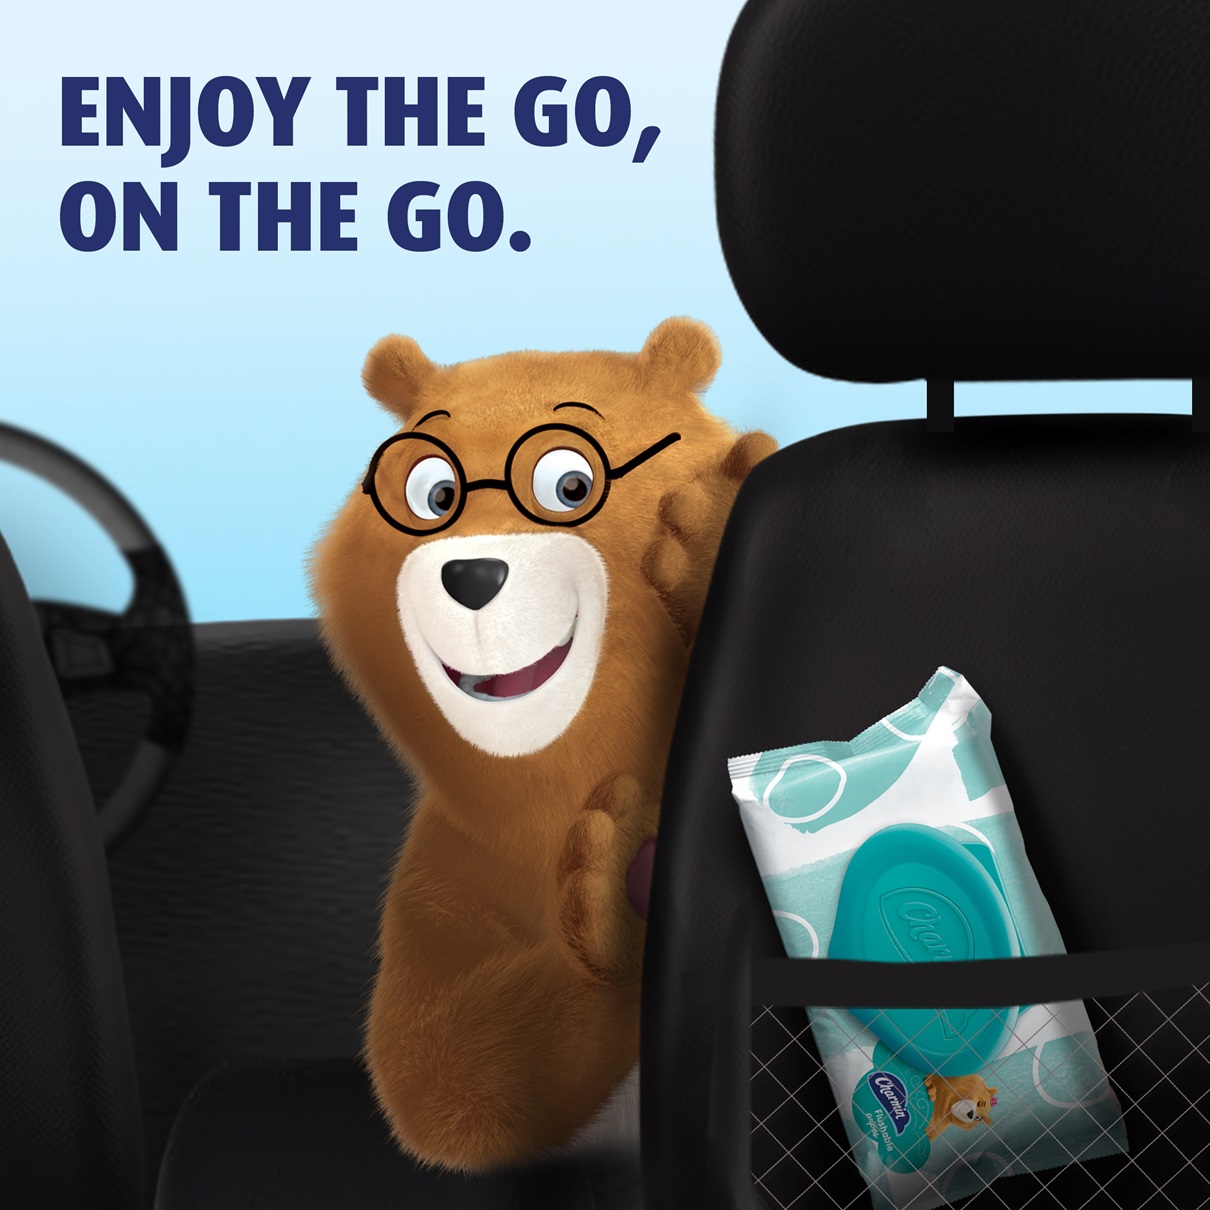 Enjoy the go in travel with Charmin flushable wipes